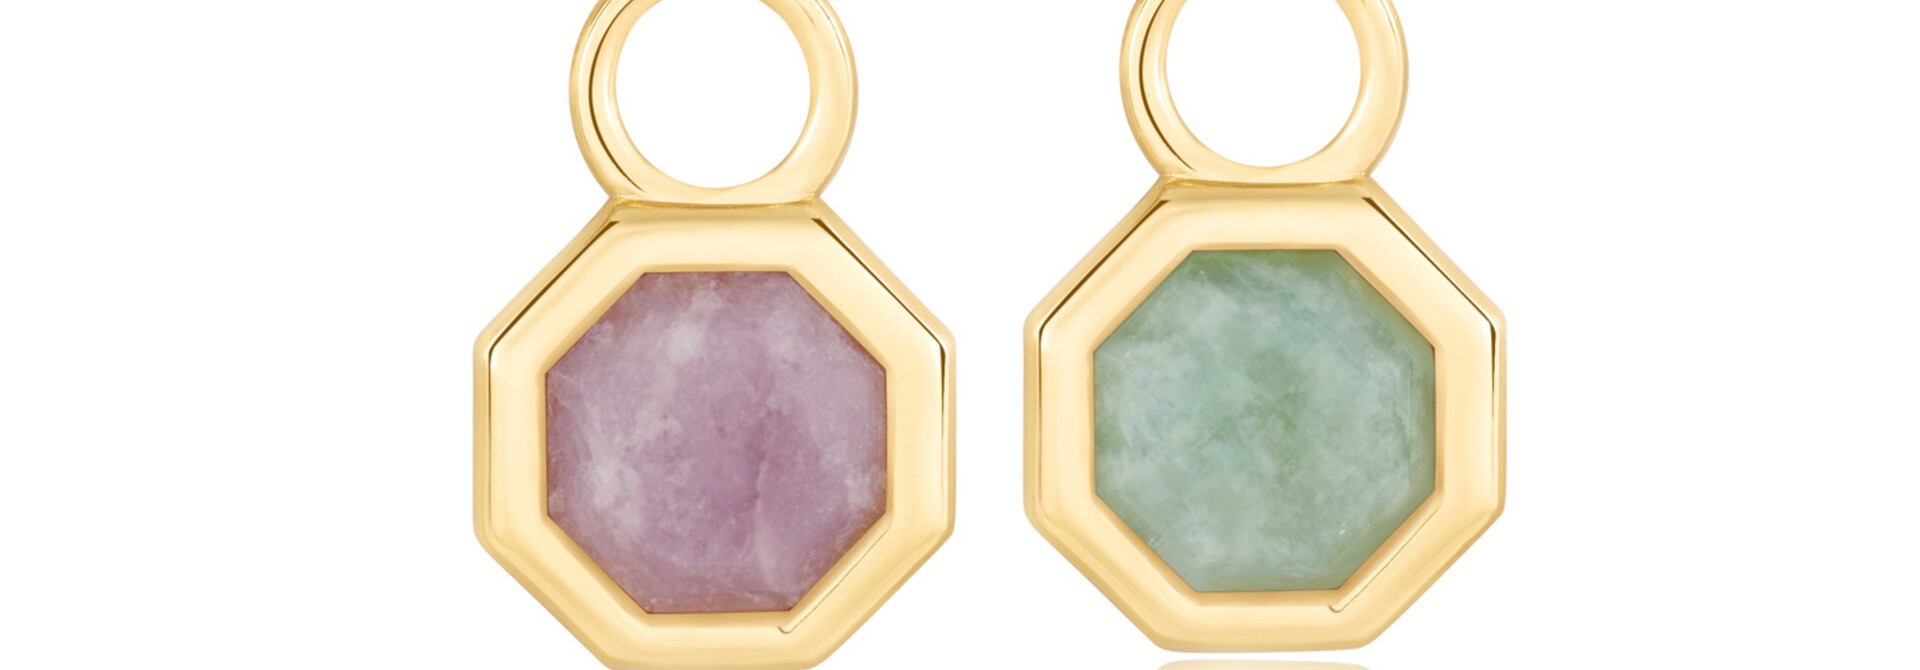 Gemstone Earring Charm - Gold Plated